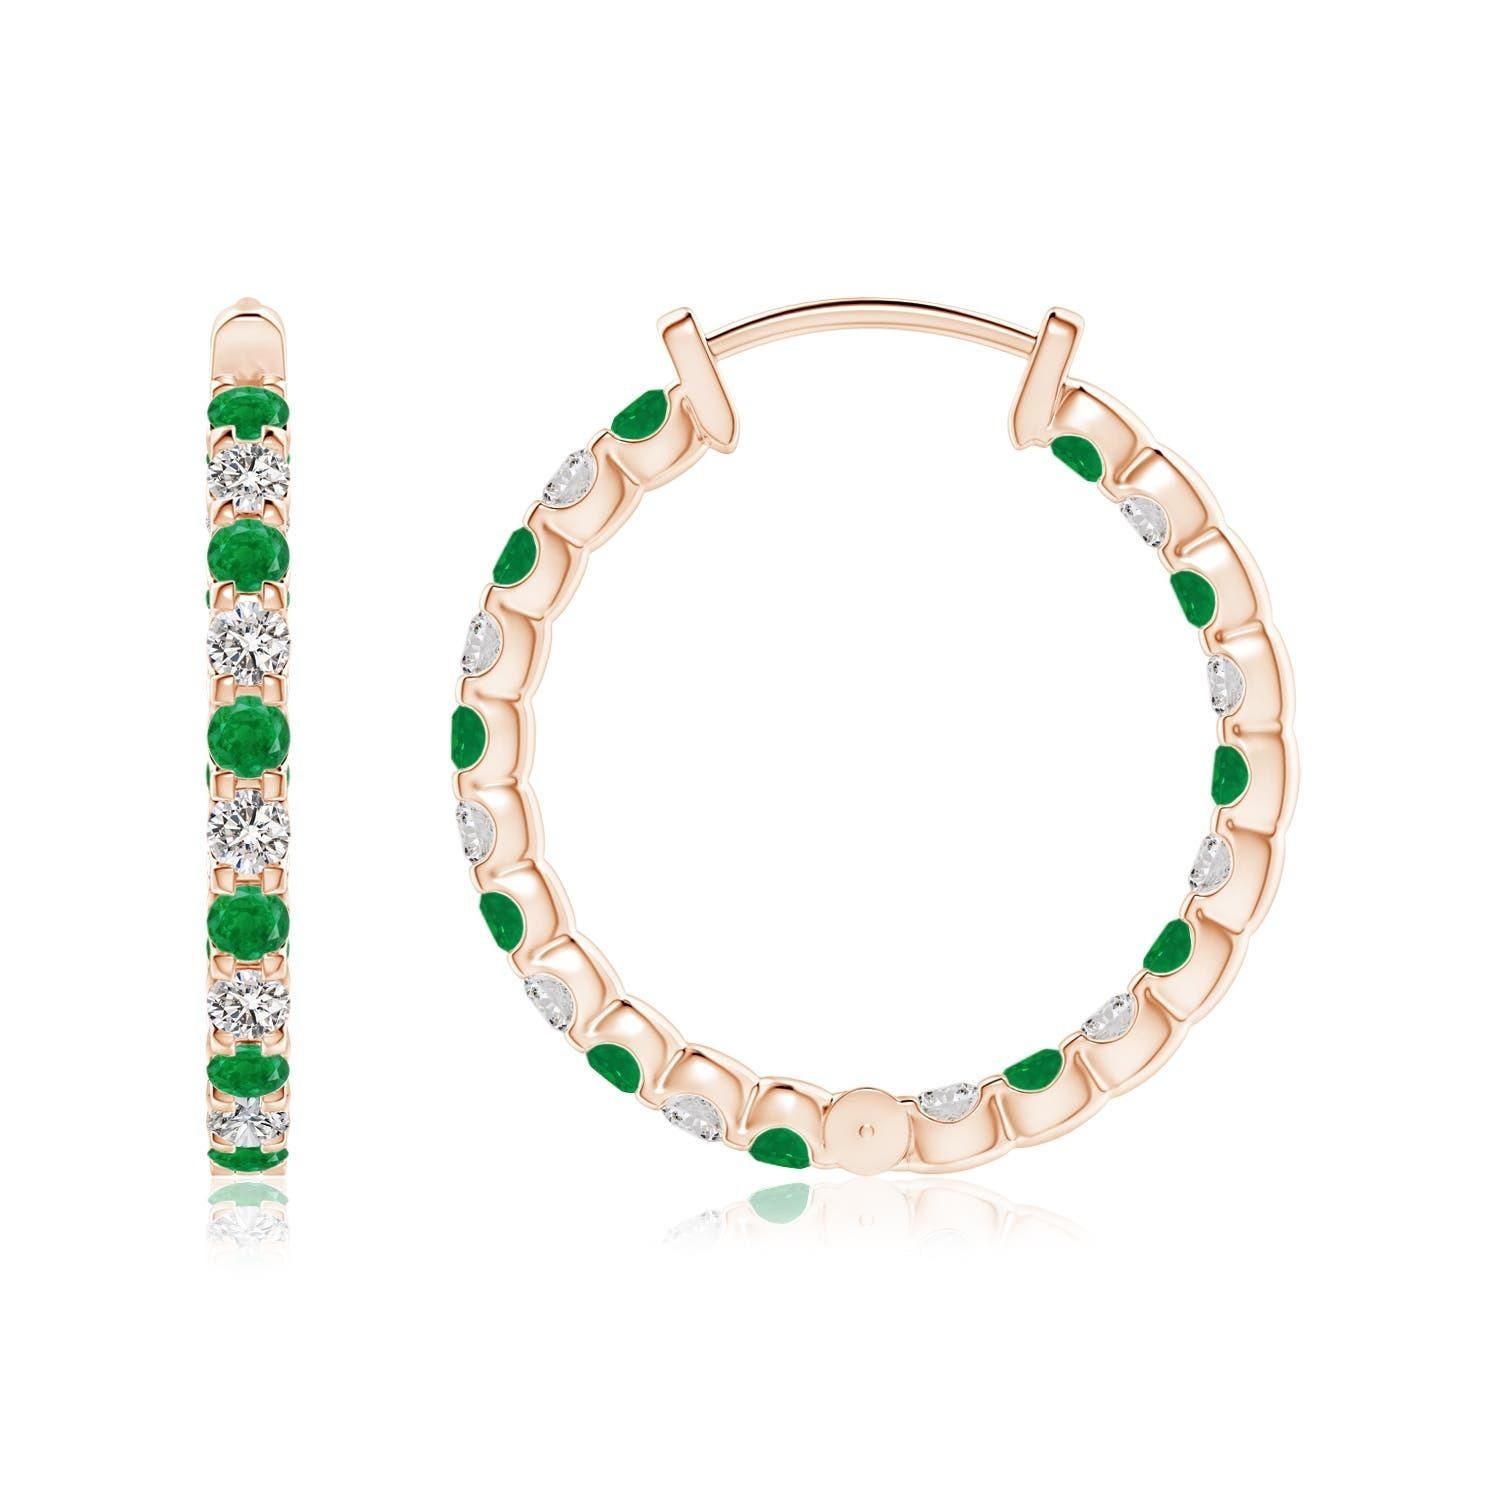 Alternately secured in prong settings are lush green emeralds and brilliant diamonds on these stunning hoop earrings. The scintillating gems are embellished on the outside as well as the inside of these 14k rose gold hoops, showcasing a striking